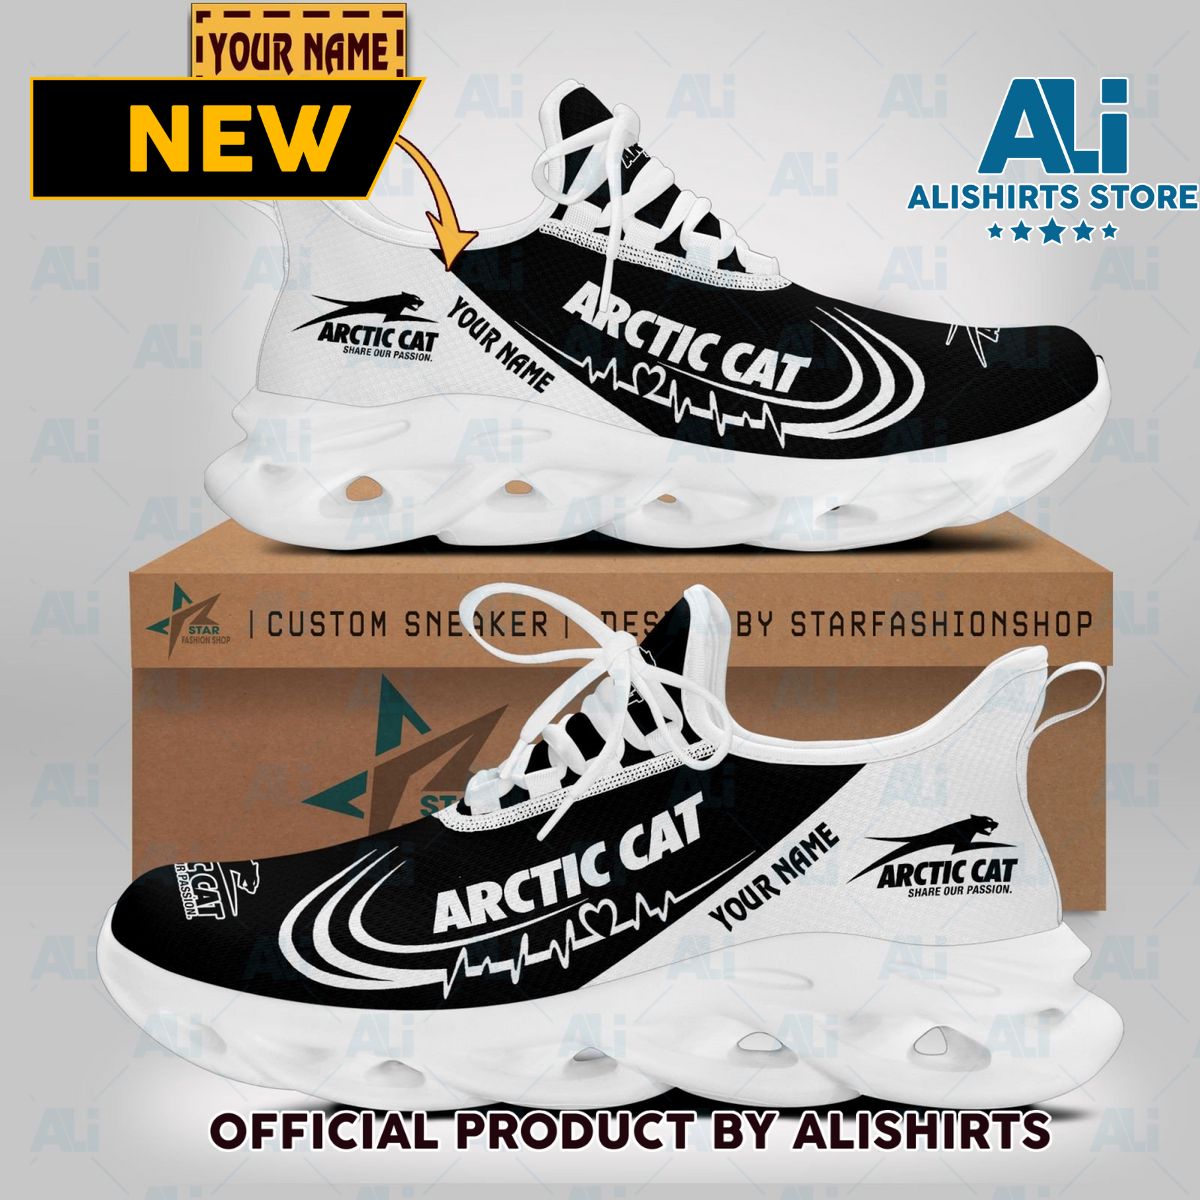 Arctic Cat Car Brand Lover Clunky Sneaker Max Soul Shoes